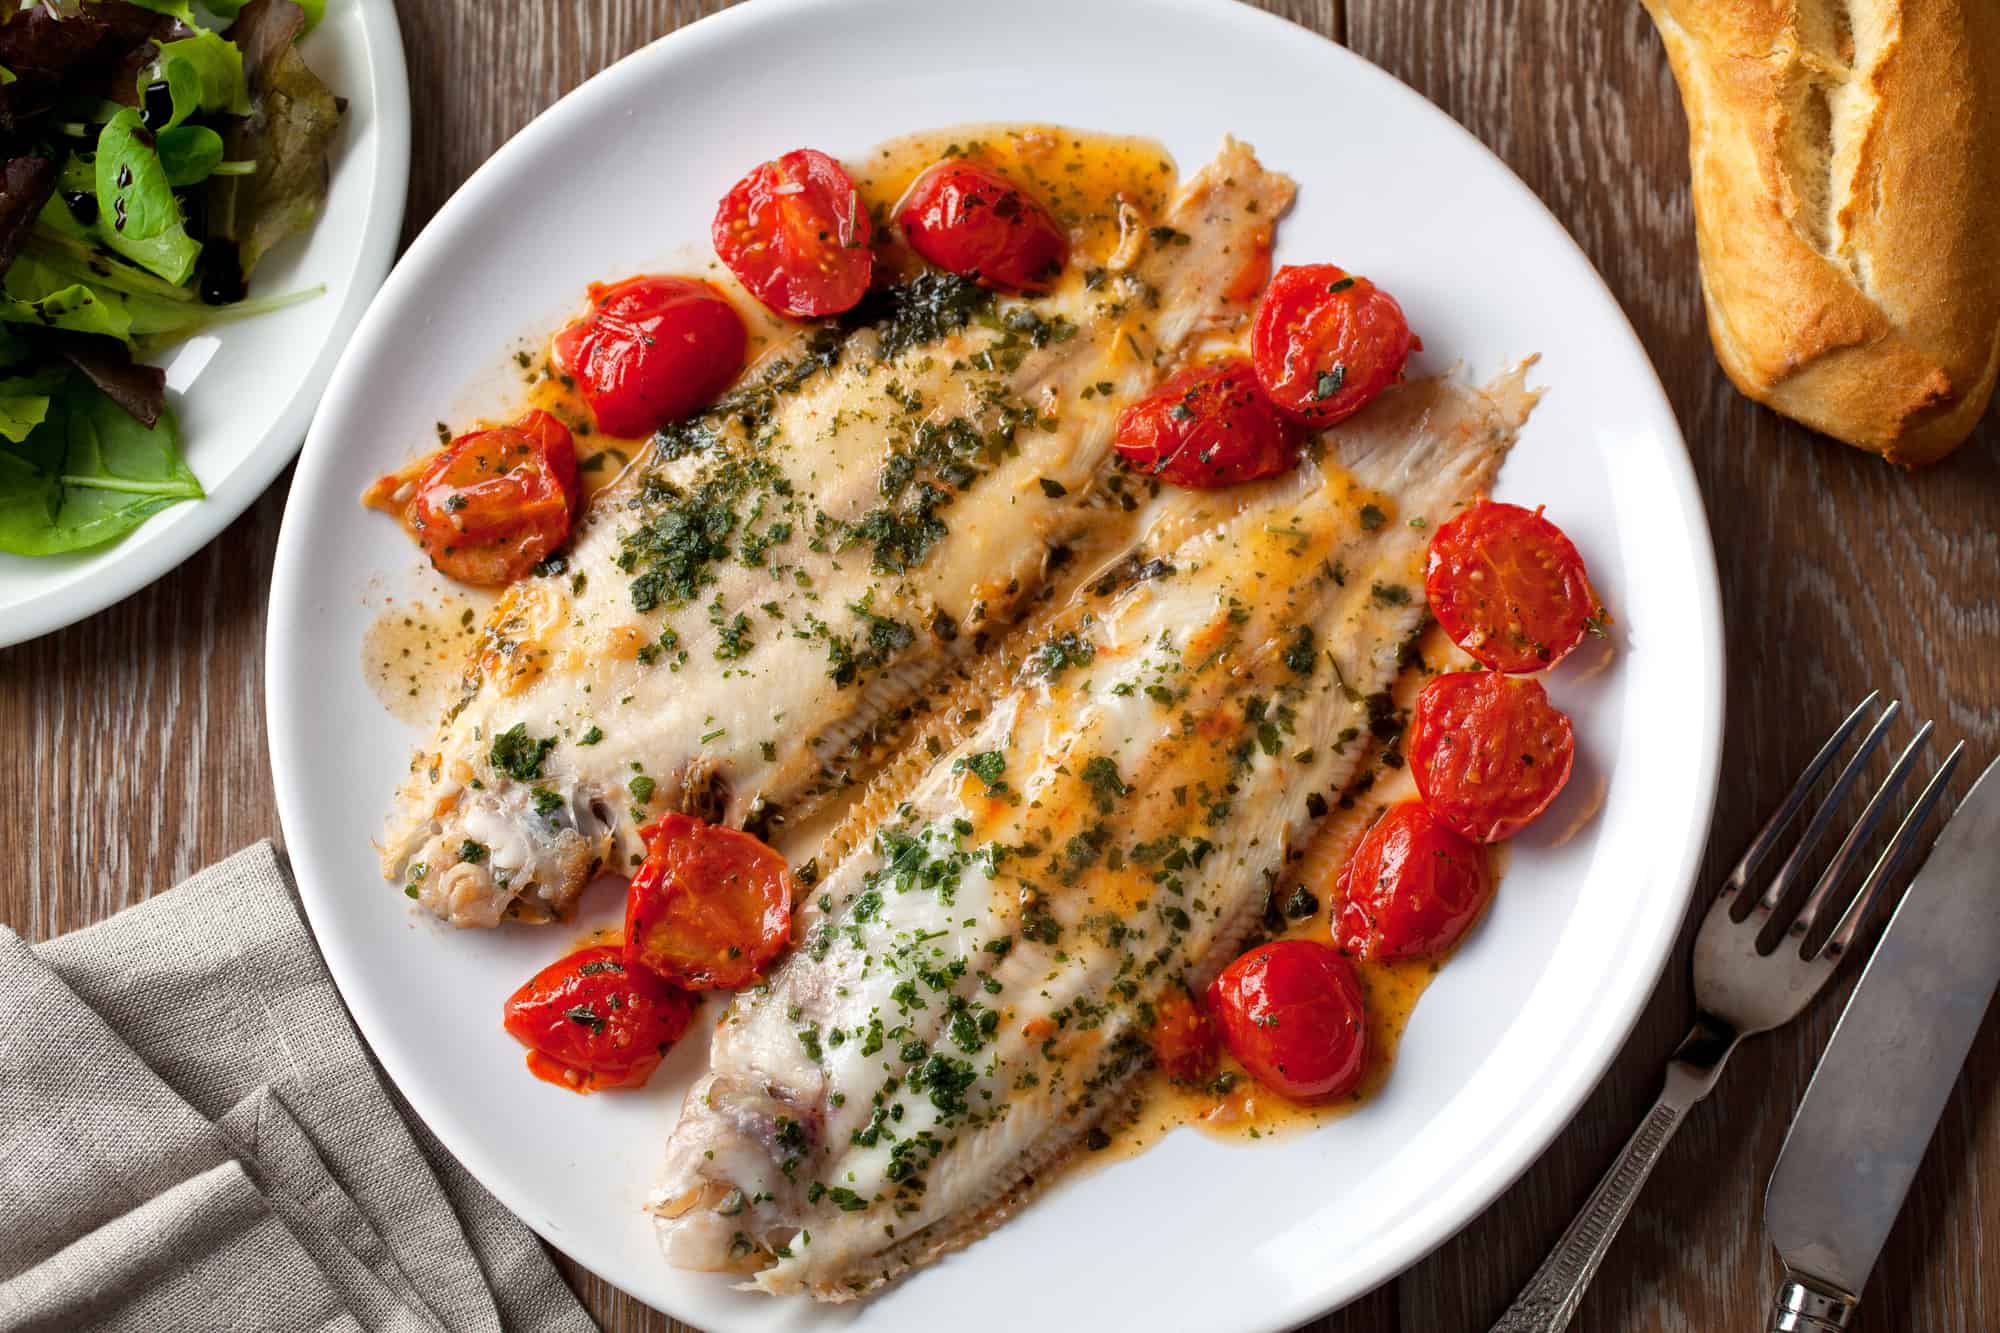 Plate of food with fish and tomatoes